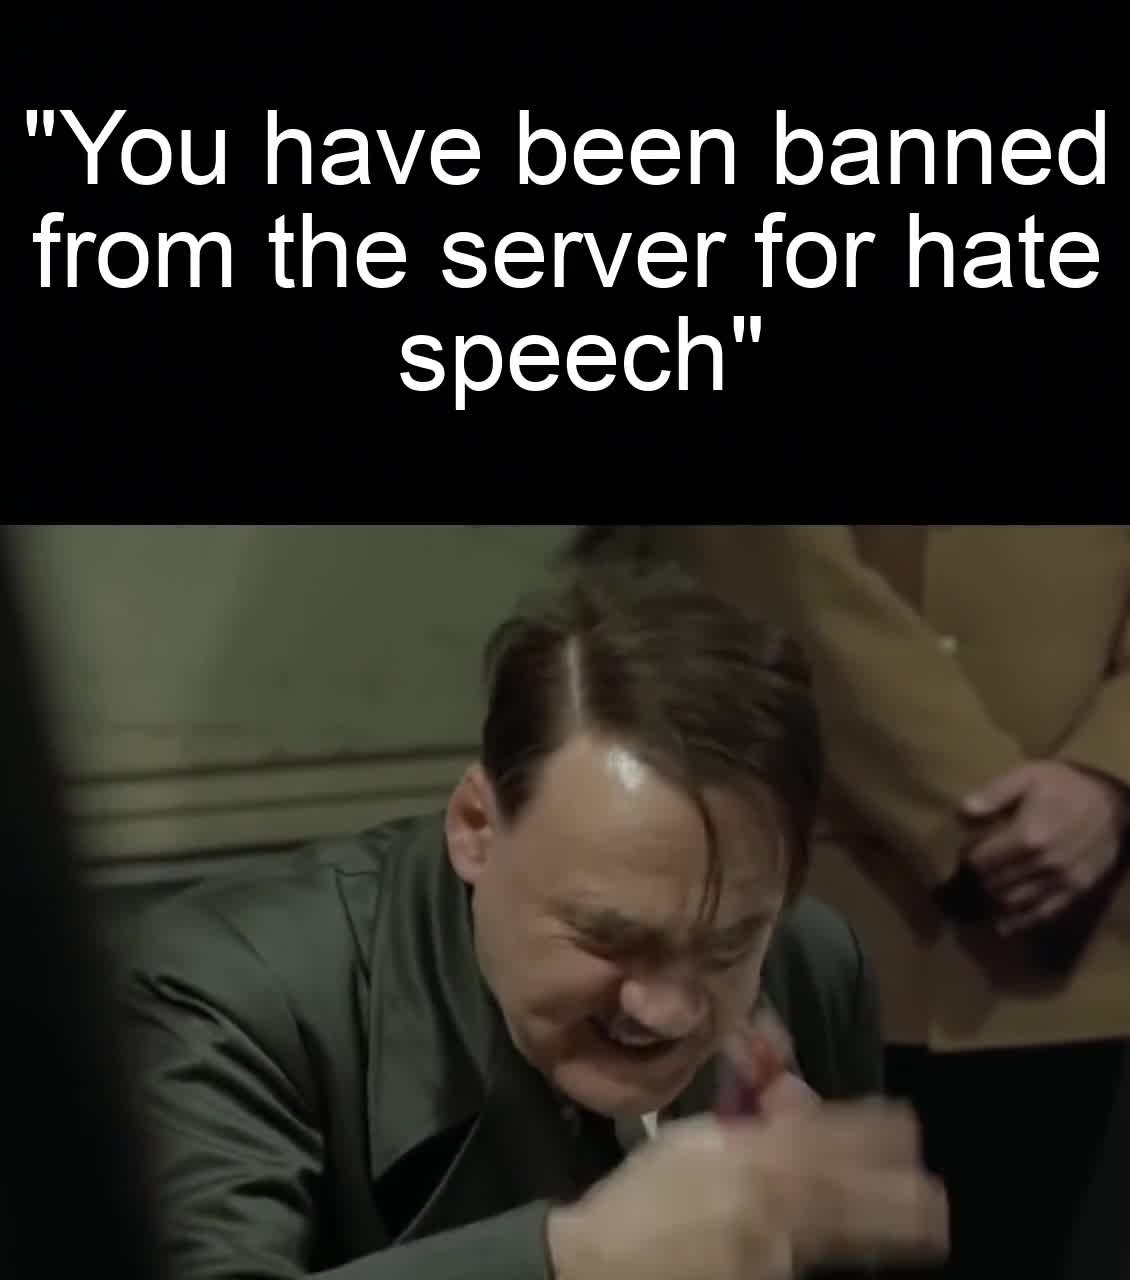 Hitler Reacts To Get Banned For Hate Speech